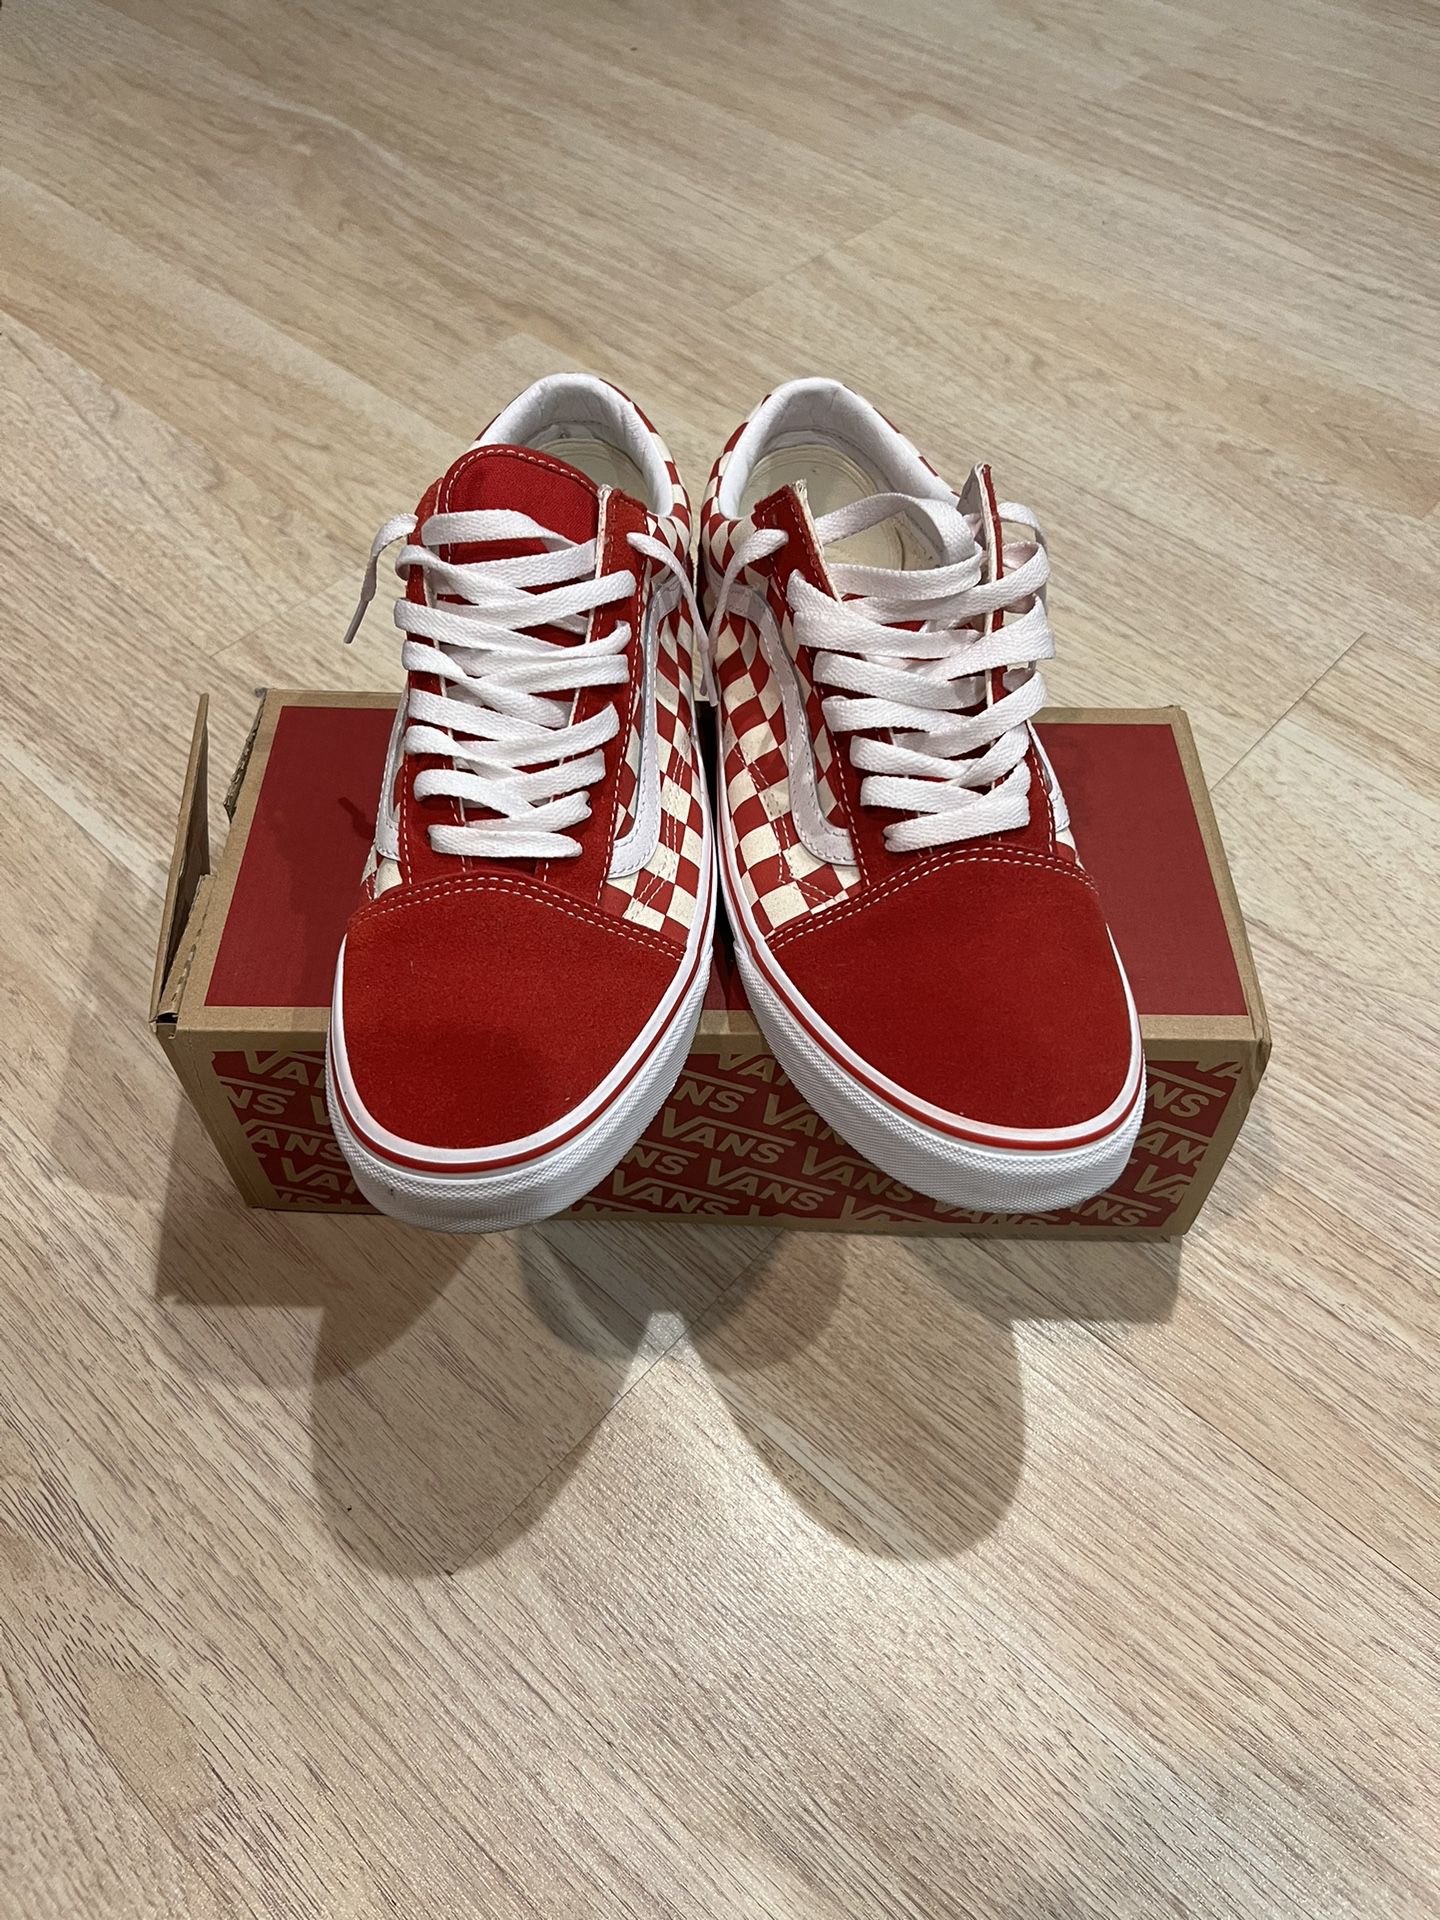 Red Checkered Vans (size 10 US men’s) for Sale in Pawtucket, RI - OfferUp